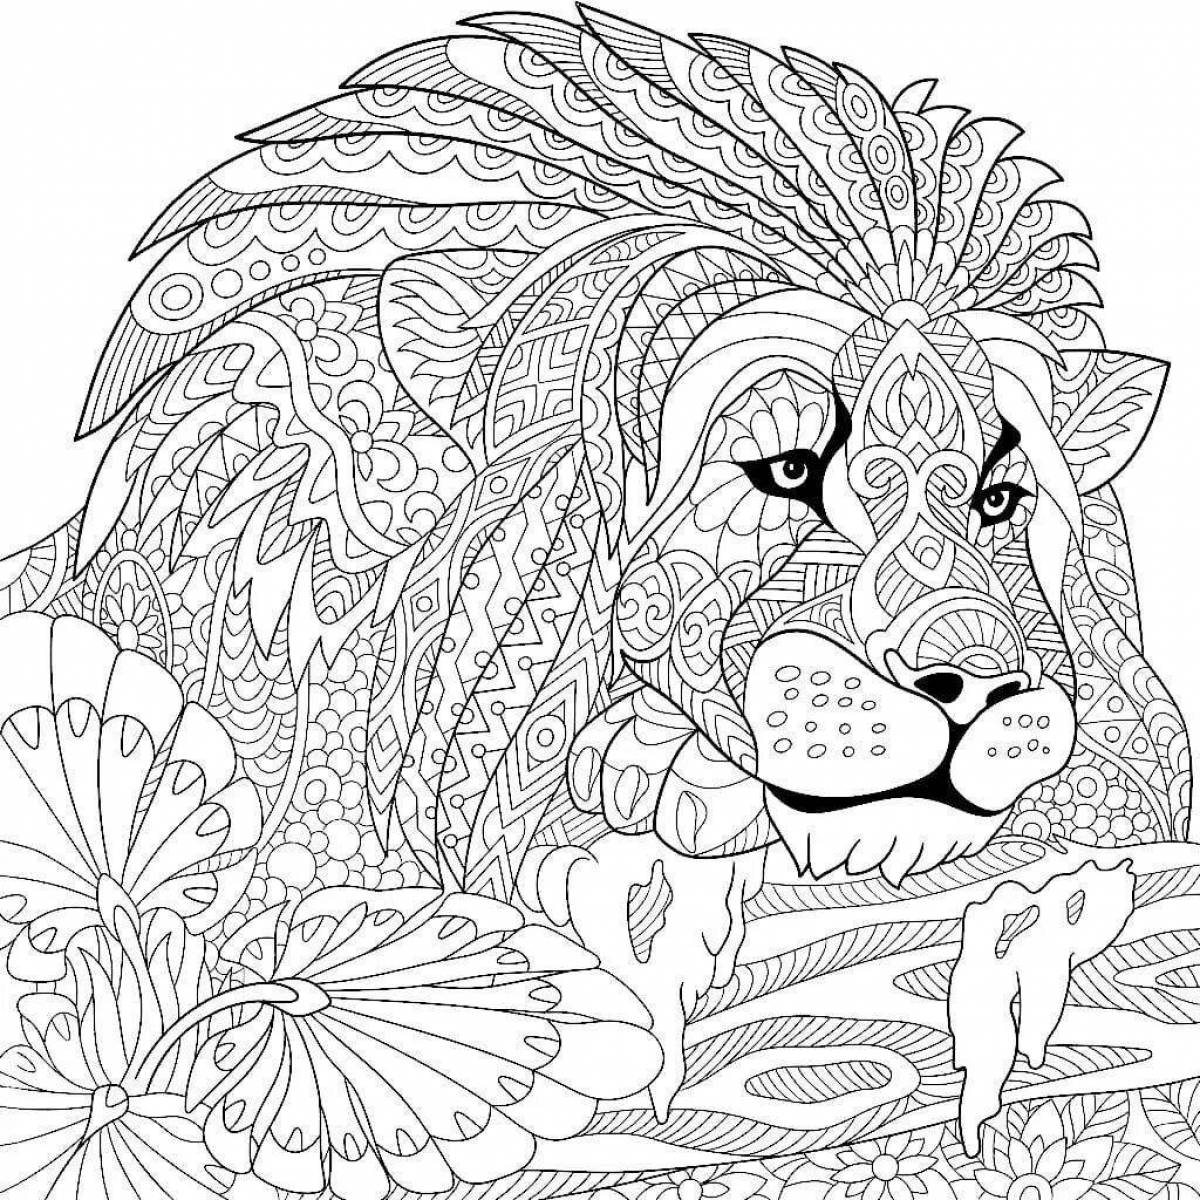 Funny animal coloring by numbers